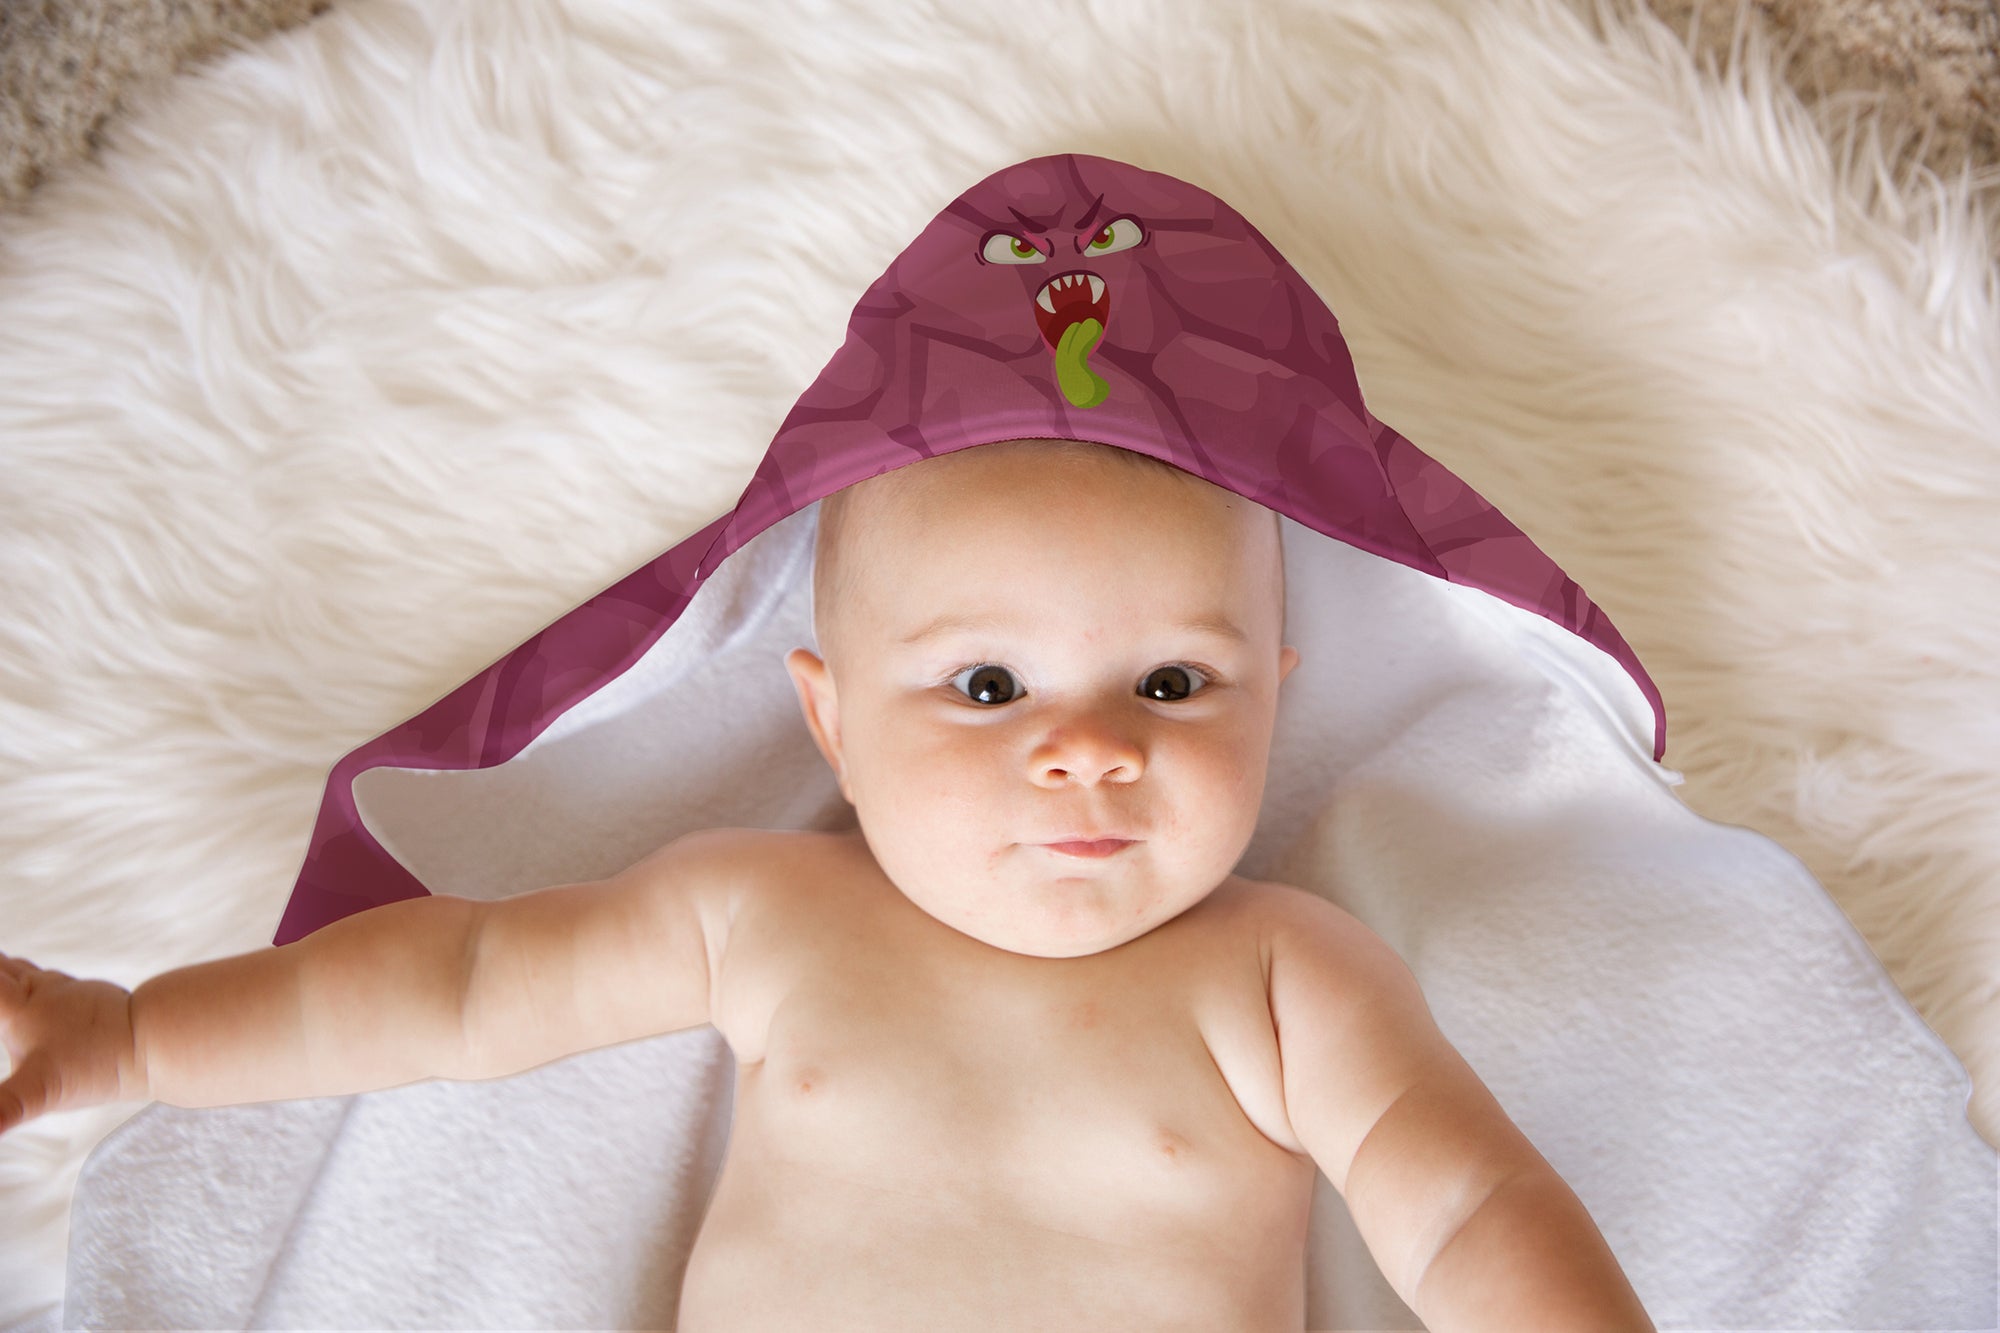 Buy this Magenta Monster Soft and Absorbent Hooded Baby Towel